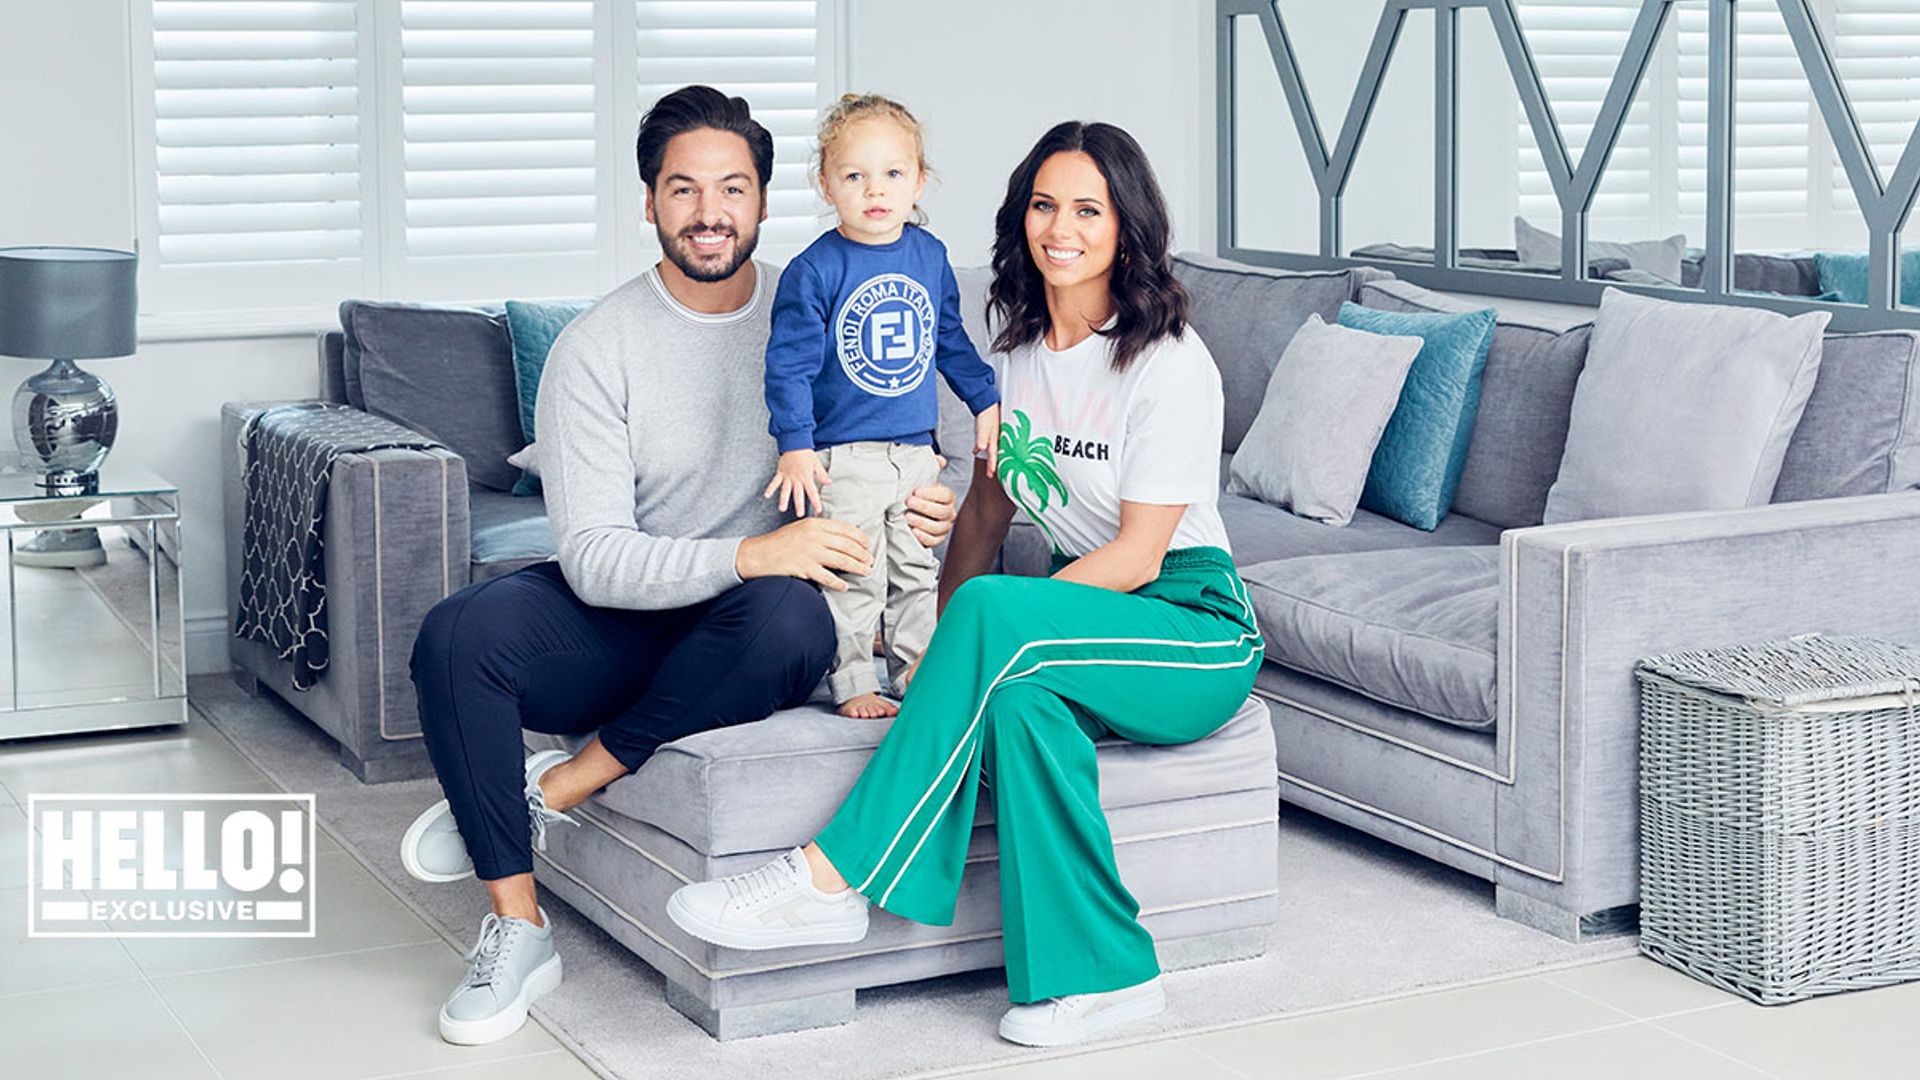 Mario Falcone and fiancée Becky share hope for a June wedding in Italy - exclusive